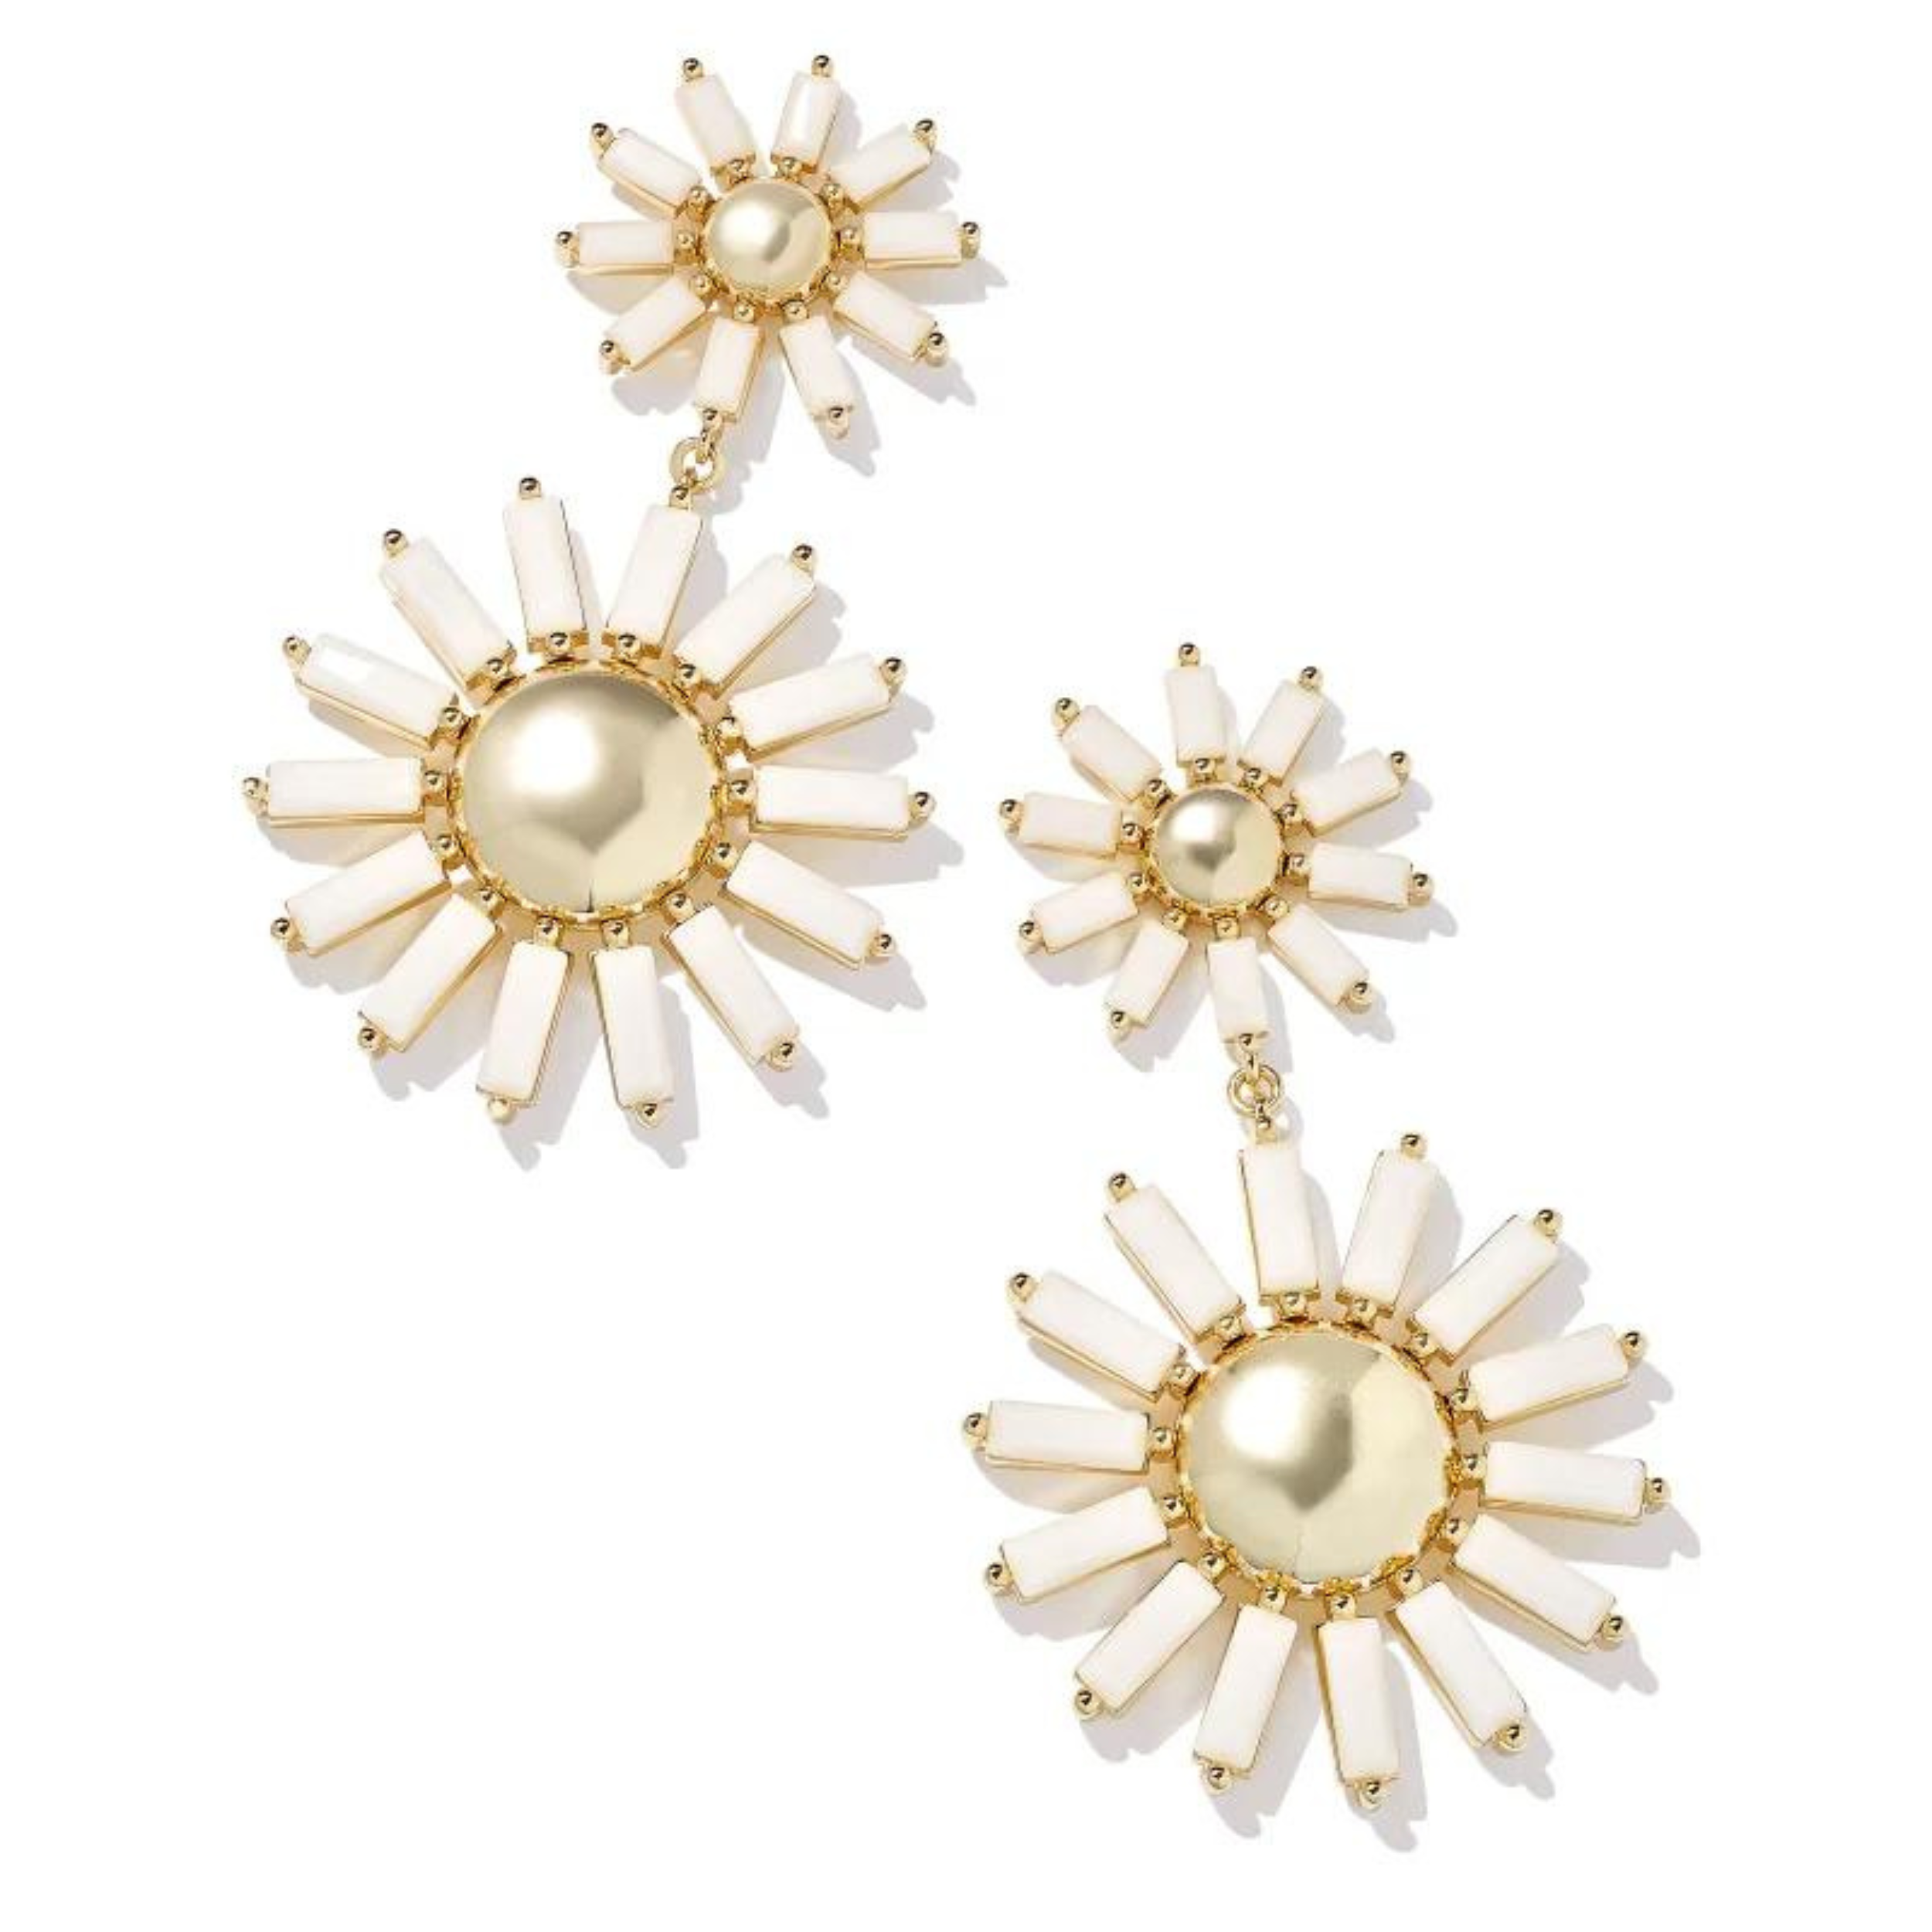 Gold flower stud post dangle earrings, pictured on a white background.